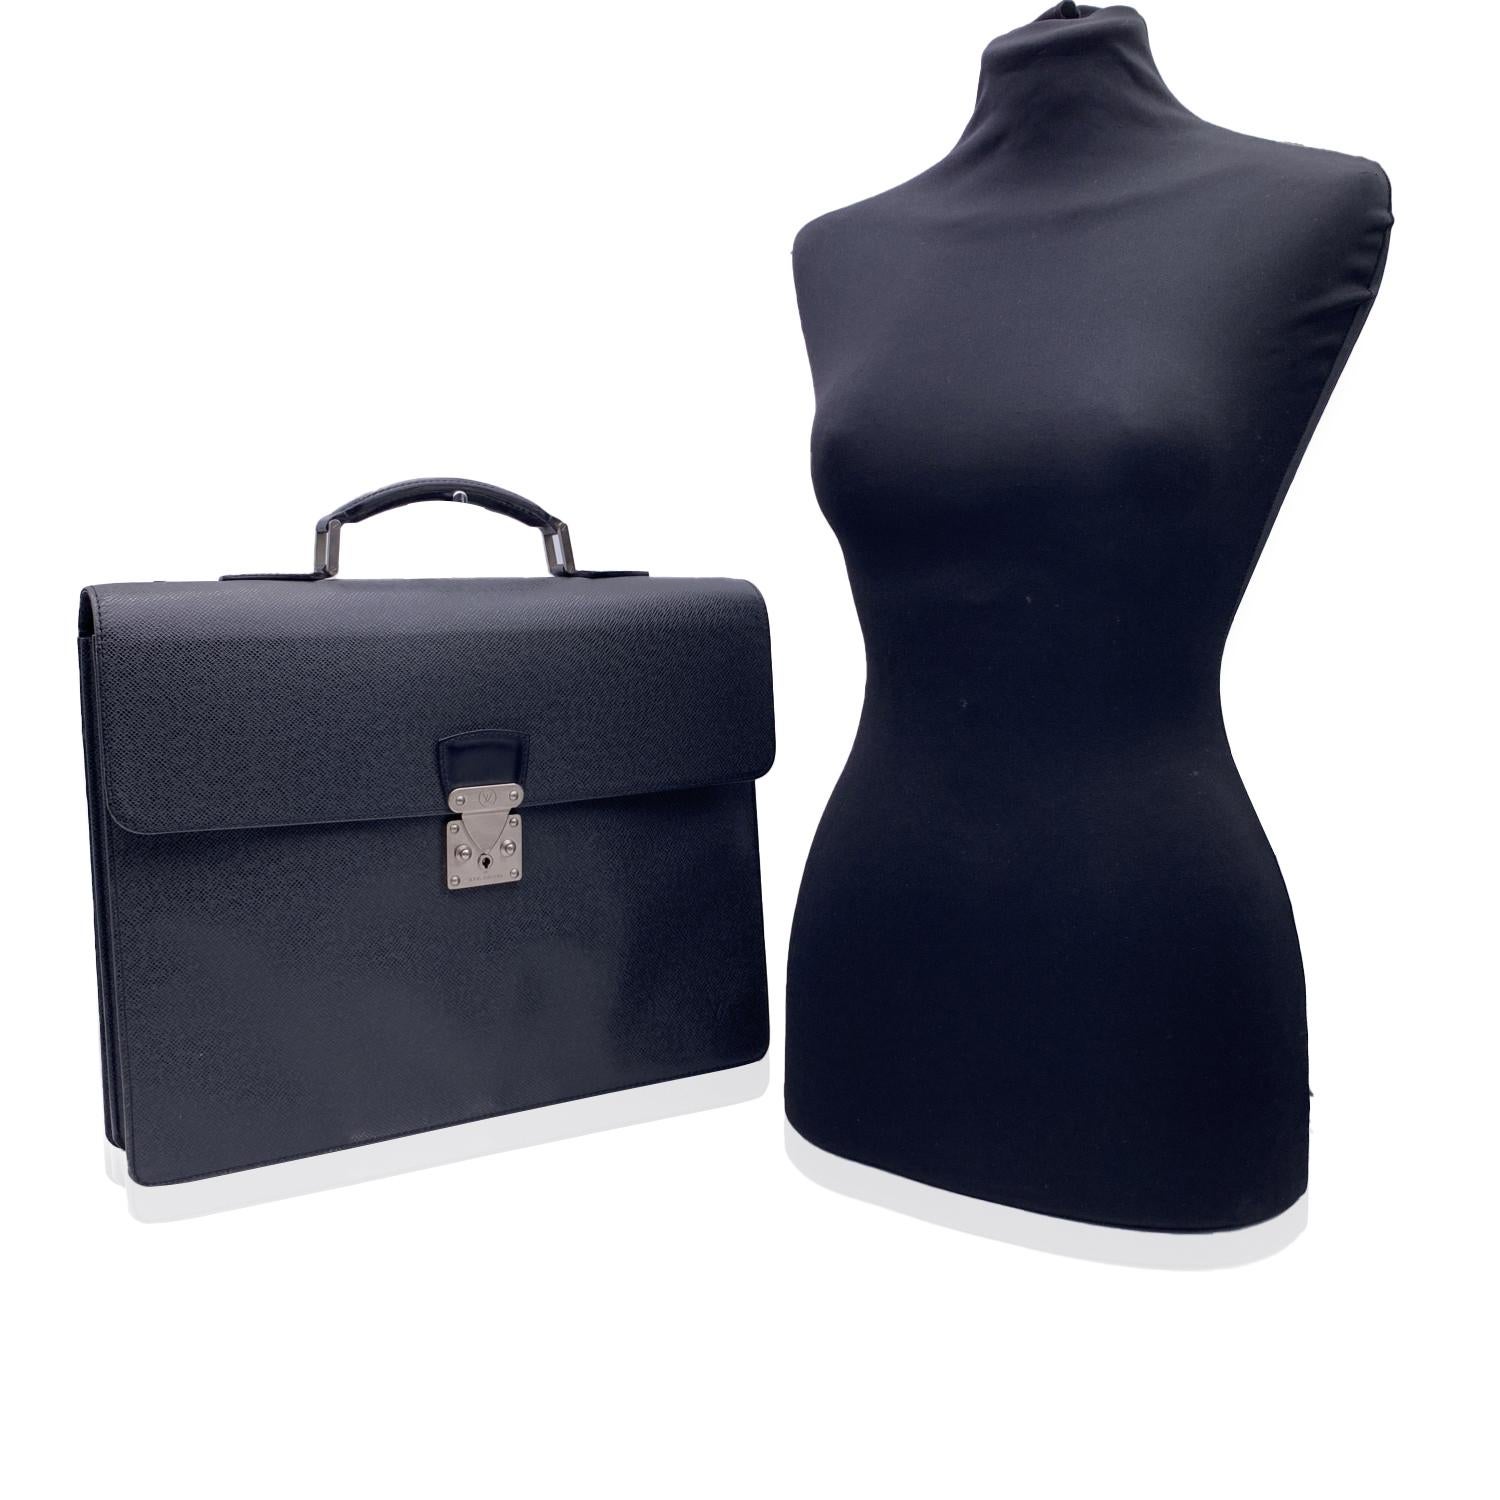 Classic and elegant 'Robusto 2' Briefcase work bag by Louis Vuitton. Crafted in black Taiga leather. Silver metal hardware. Flap closure with press key lock closure on the front (keys are included). Rear open pocket. 2 main internal compartments,